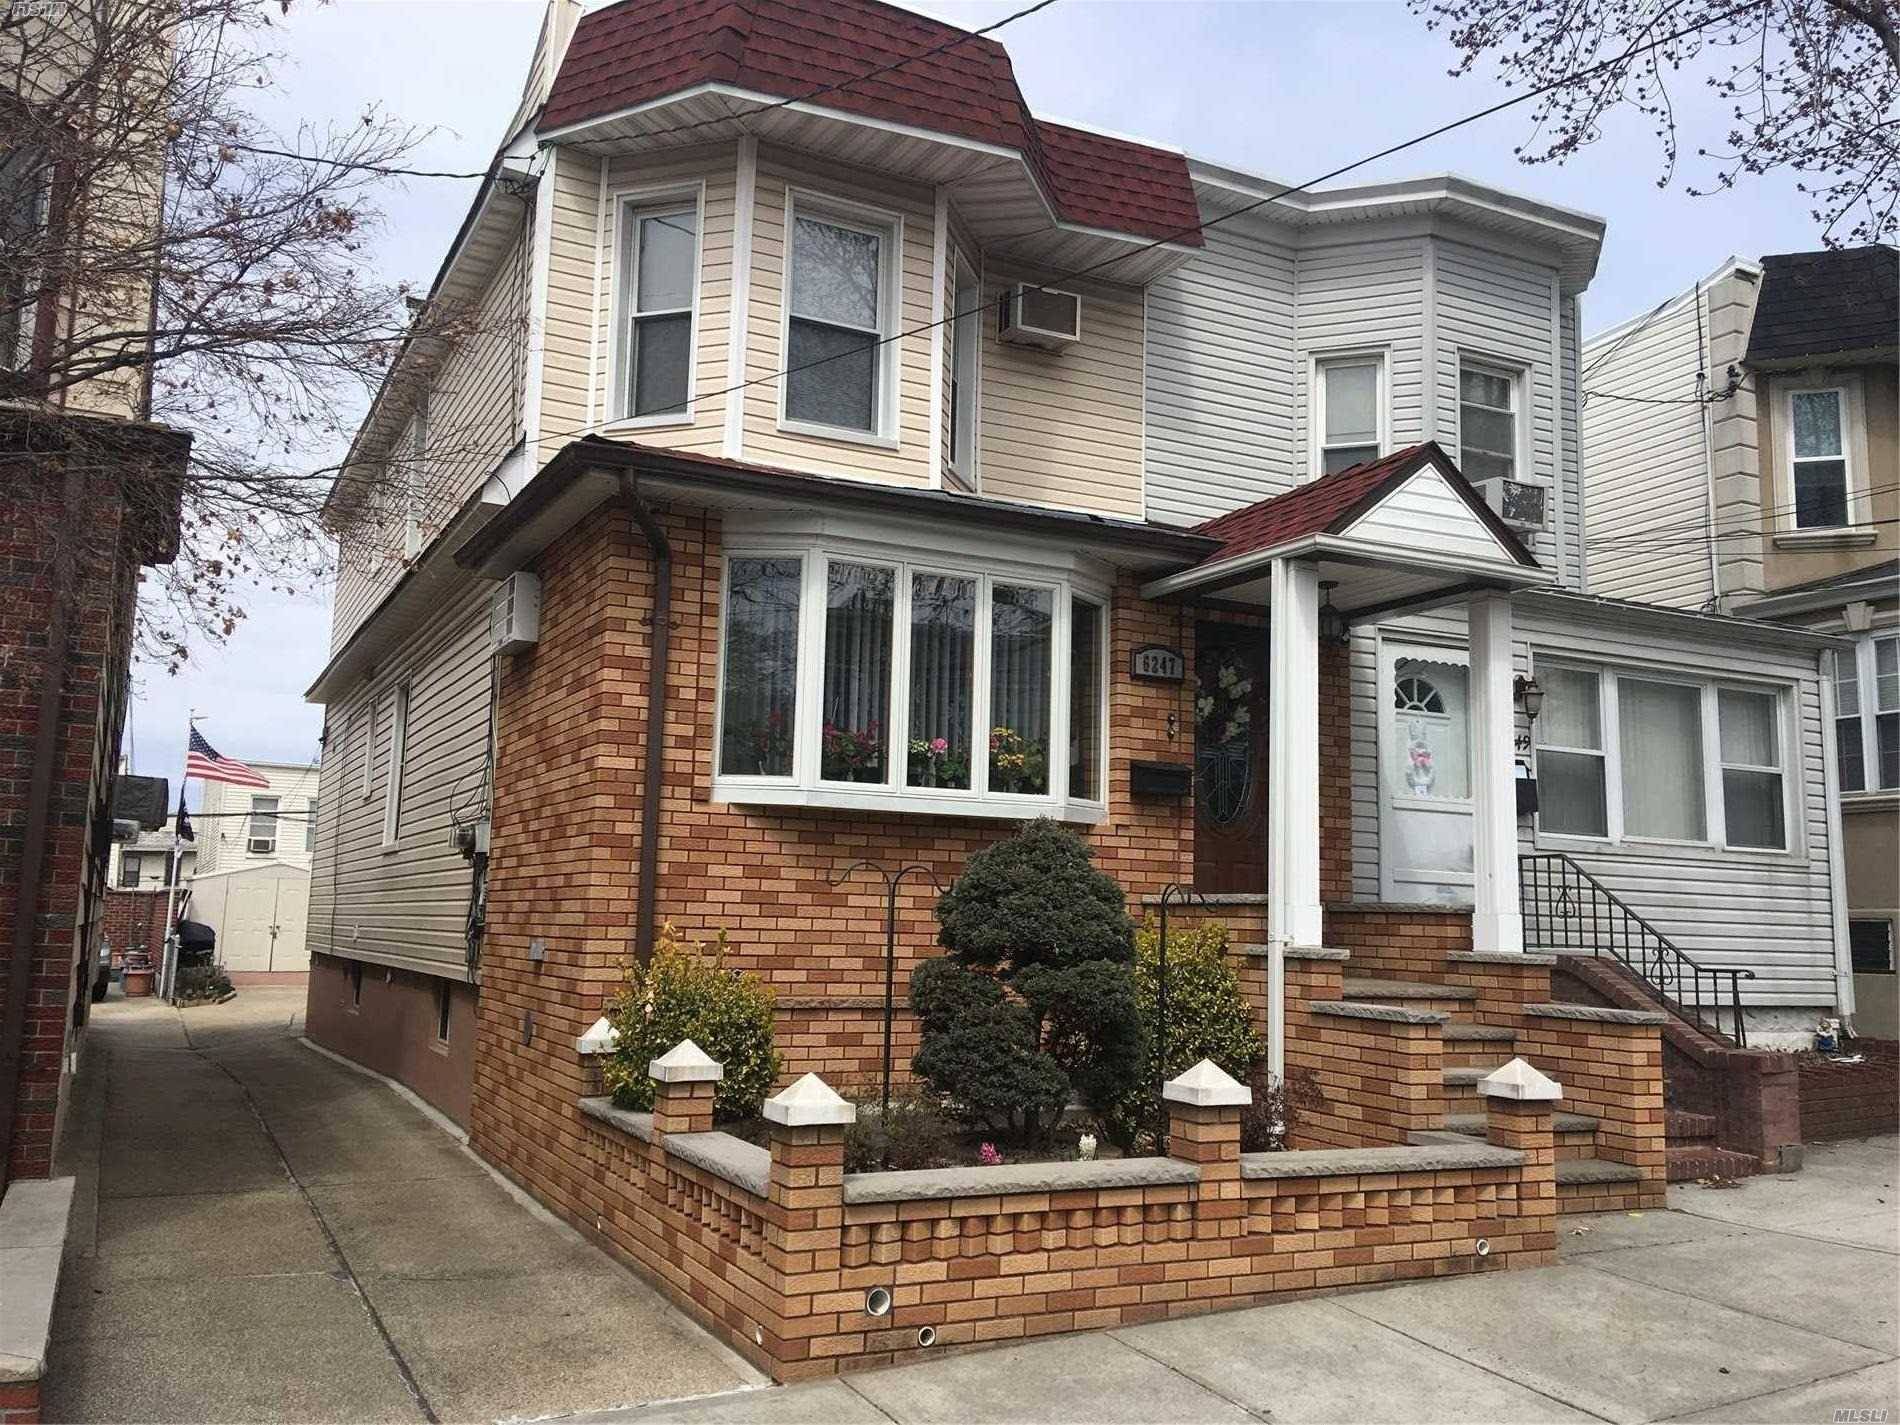 Renovated Semi Detached 2 Family House, Currently Used As 1 Family House Located In The Maspeth Ridgewood Area.